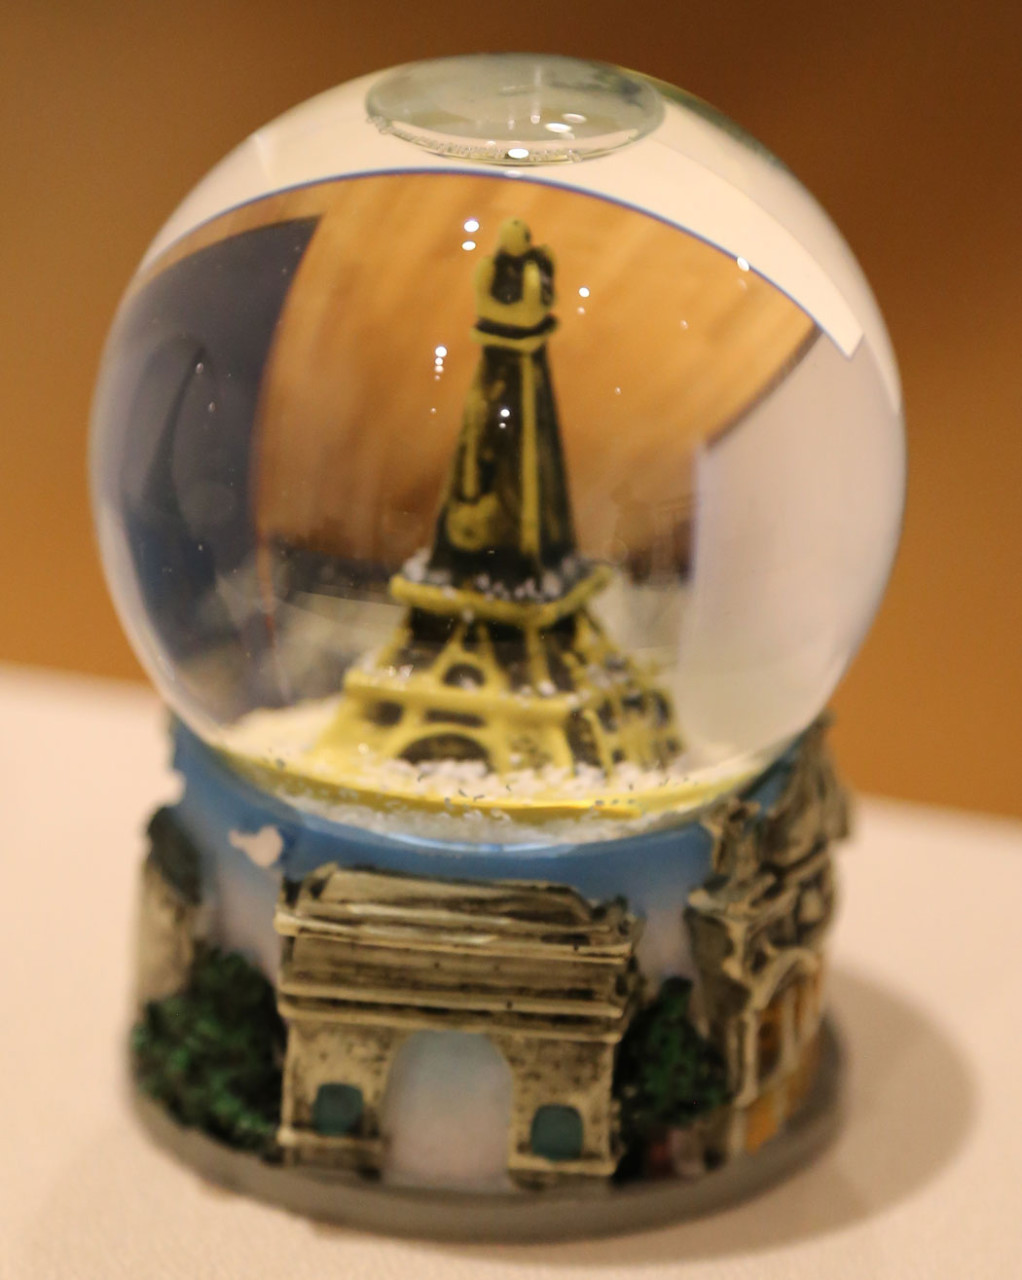 Snow globes celebrating the (then) brand new Eiffel Tower were one of the sensations of the Paris Exposition in 1889. This version is of a much later vintage. (Courtesy)